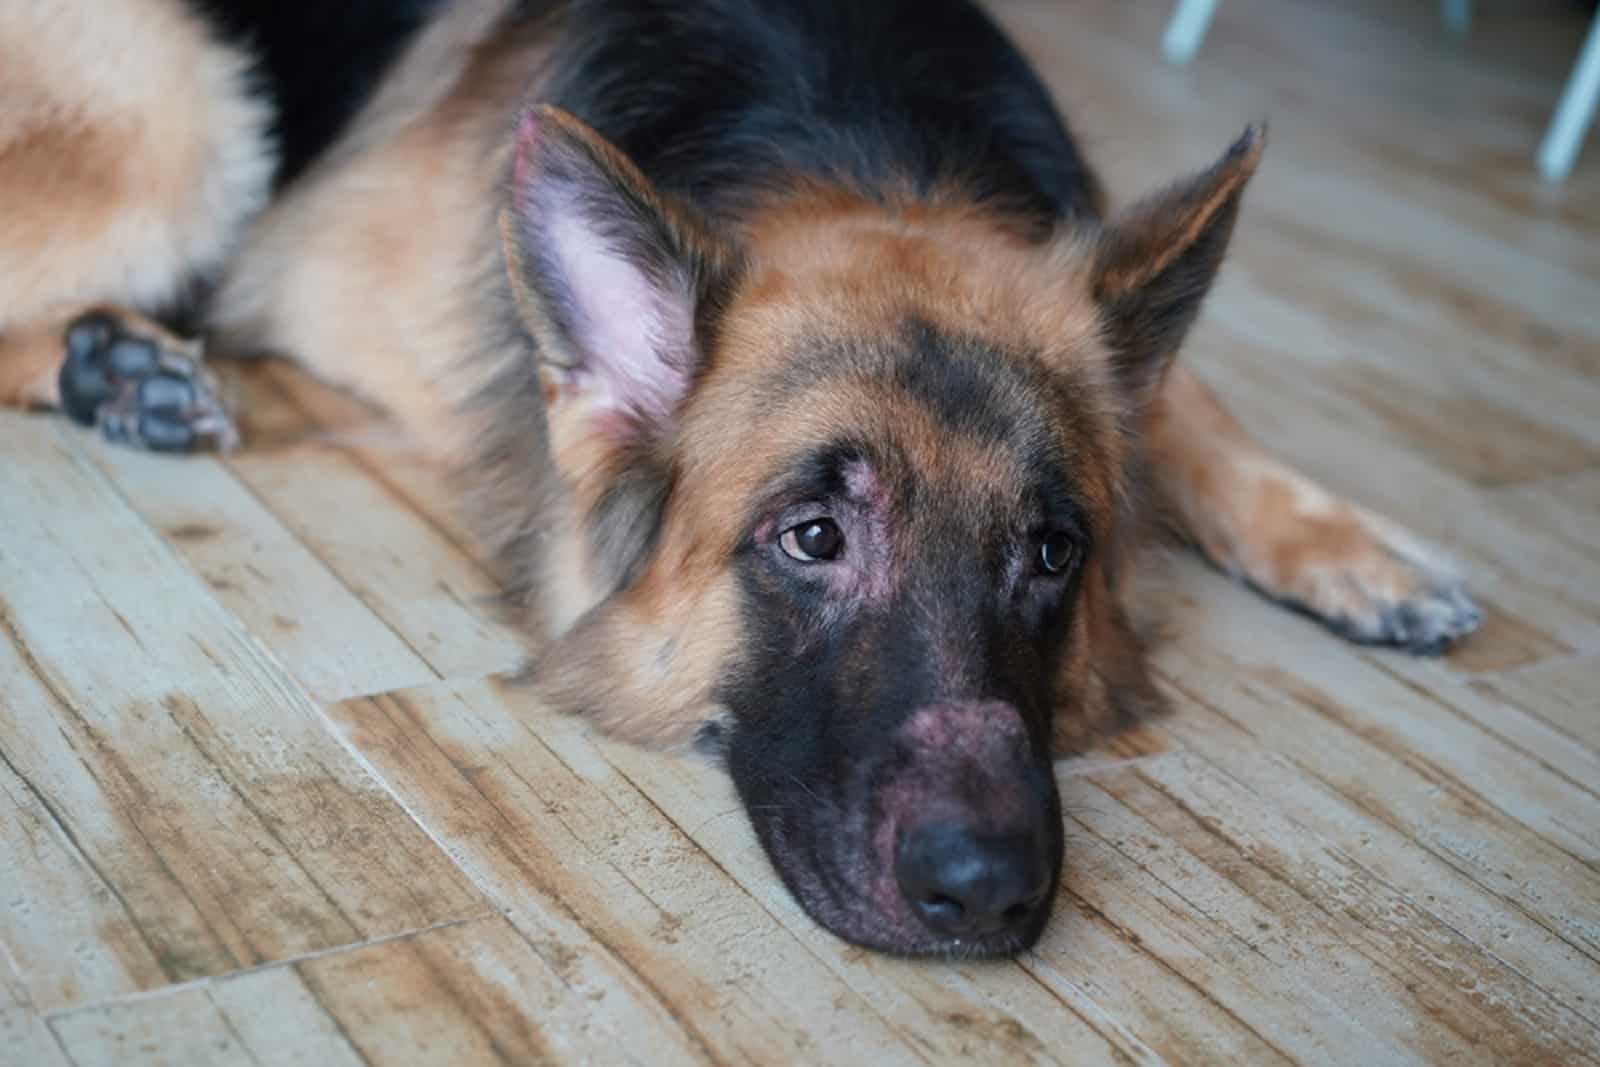 german shepherd dog with skin rash at face from allergy infection